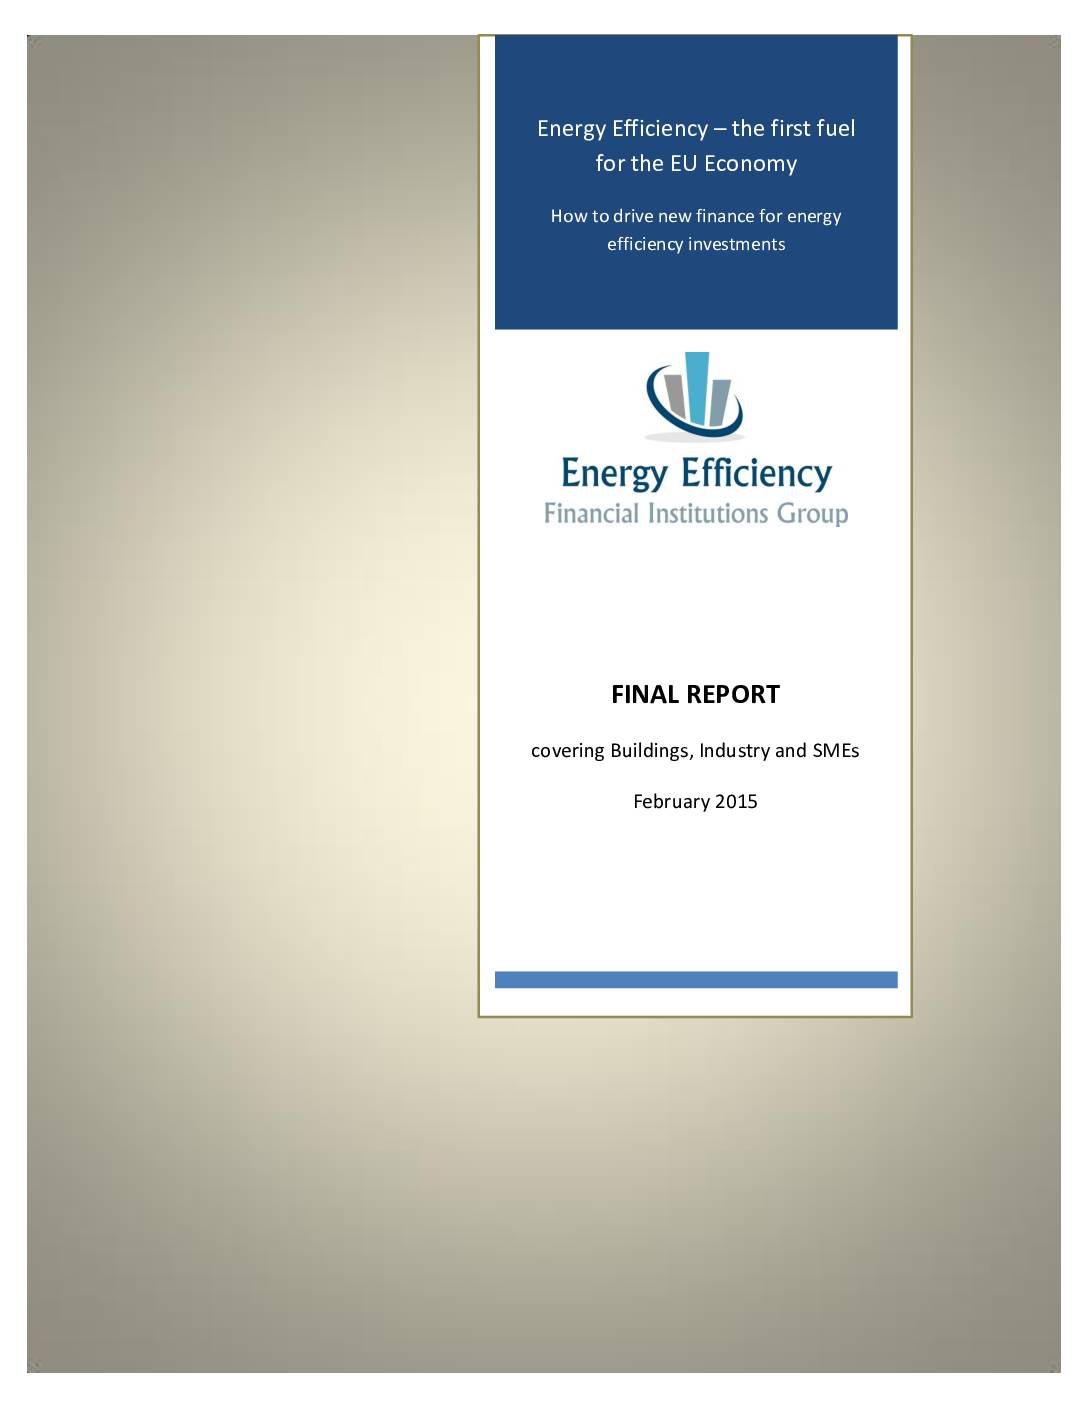 Energy Efficiency – the First Fuel for the EU Economy: How to Drive New Finance for Energy Efficiency Investments